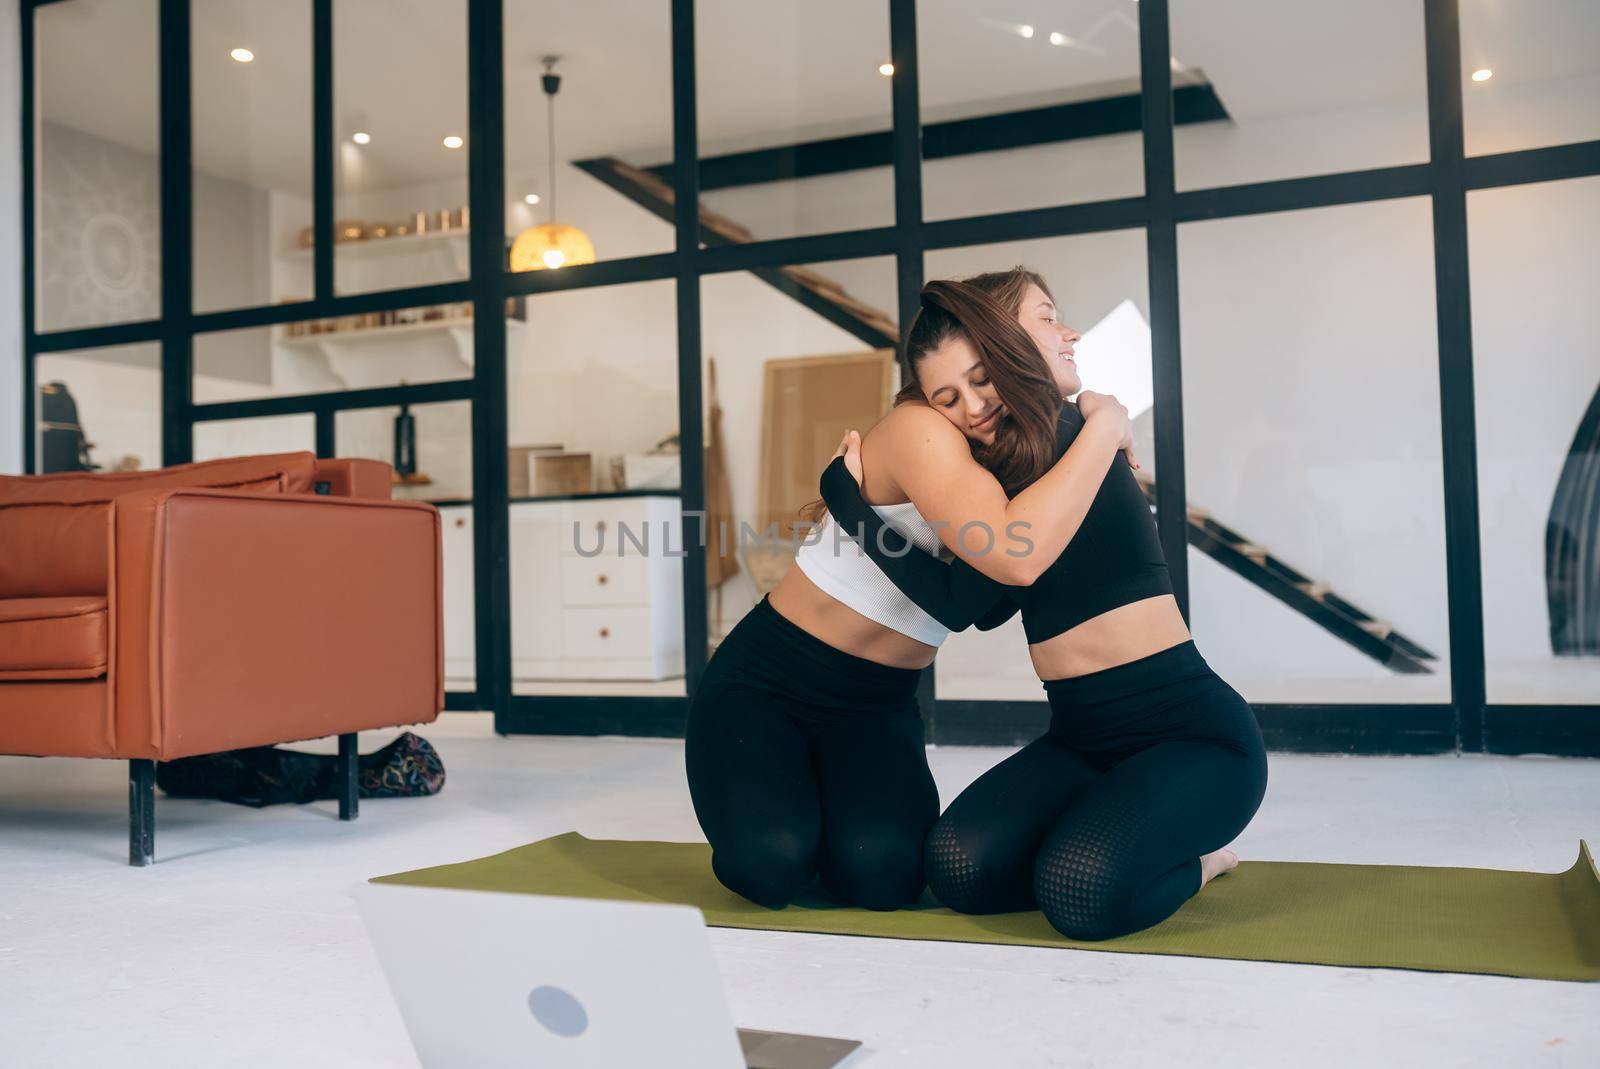 Two girlfriends hug each other after yoga at home